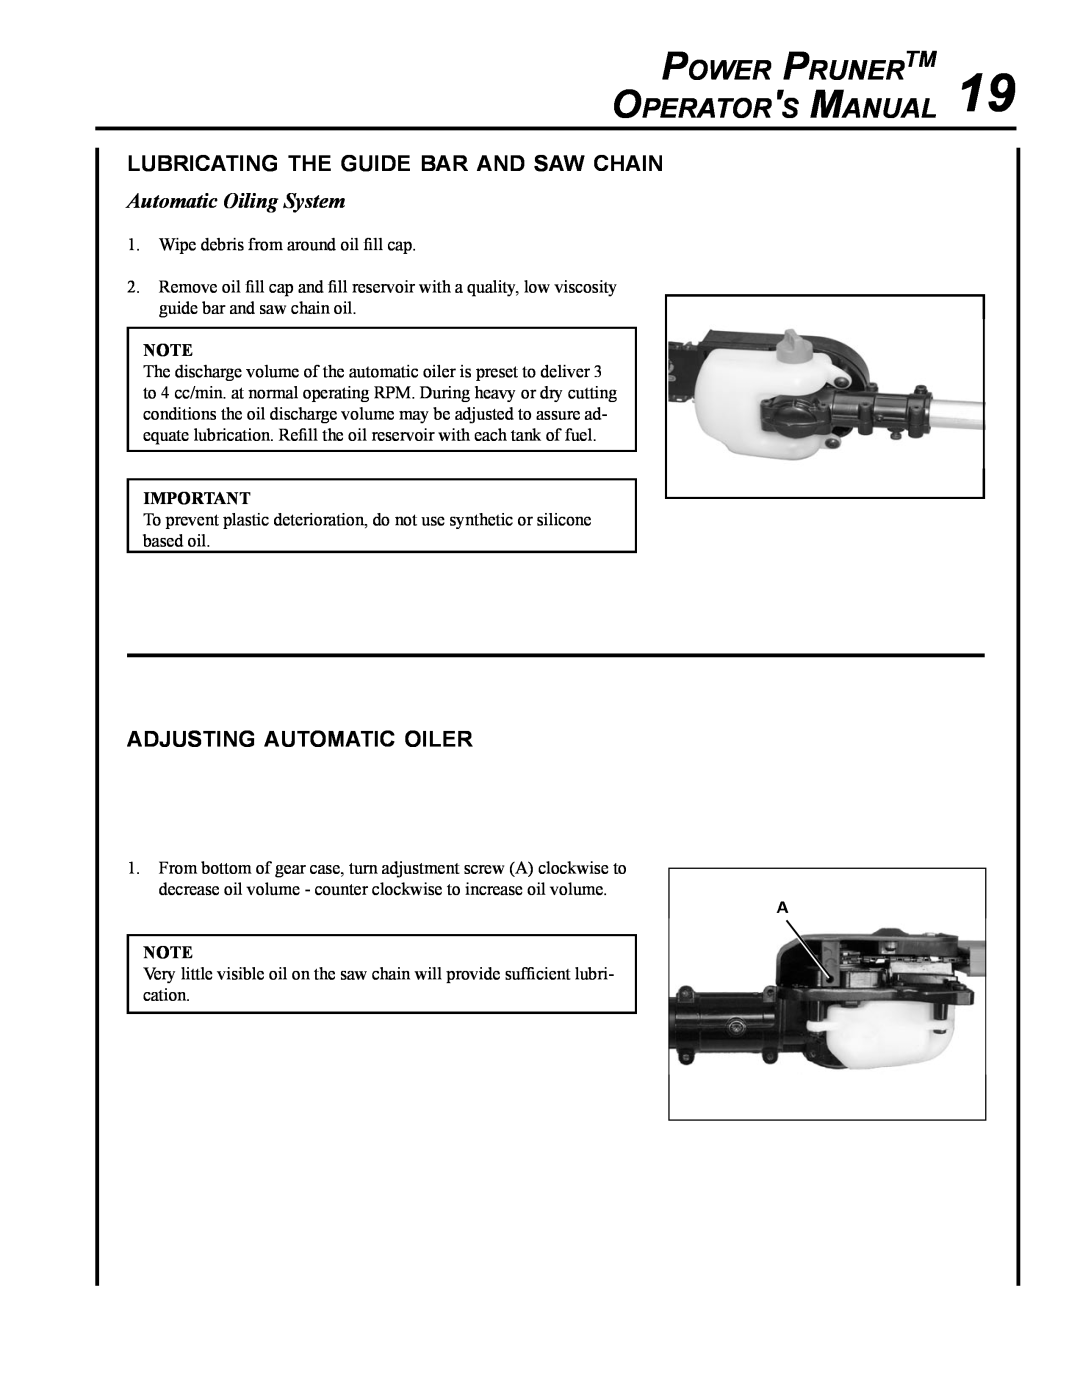 Echo PPT-265H manual lubricating the guide bar and saw chain, adjusting automatic oiler, Automatic Oiling System 